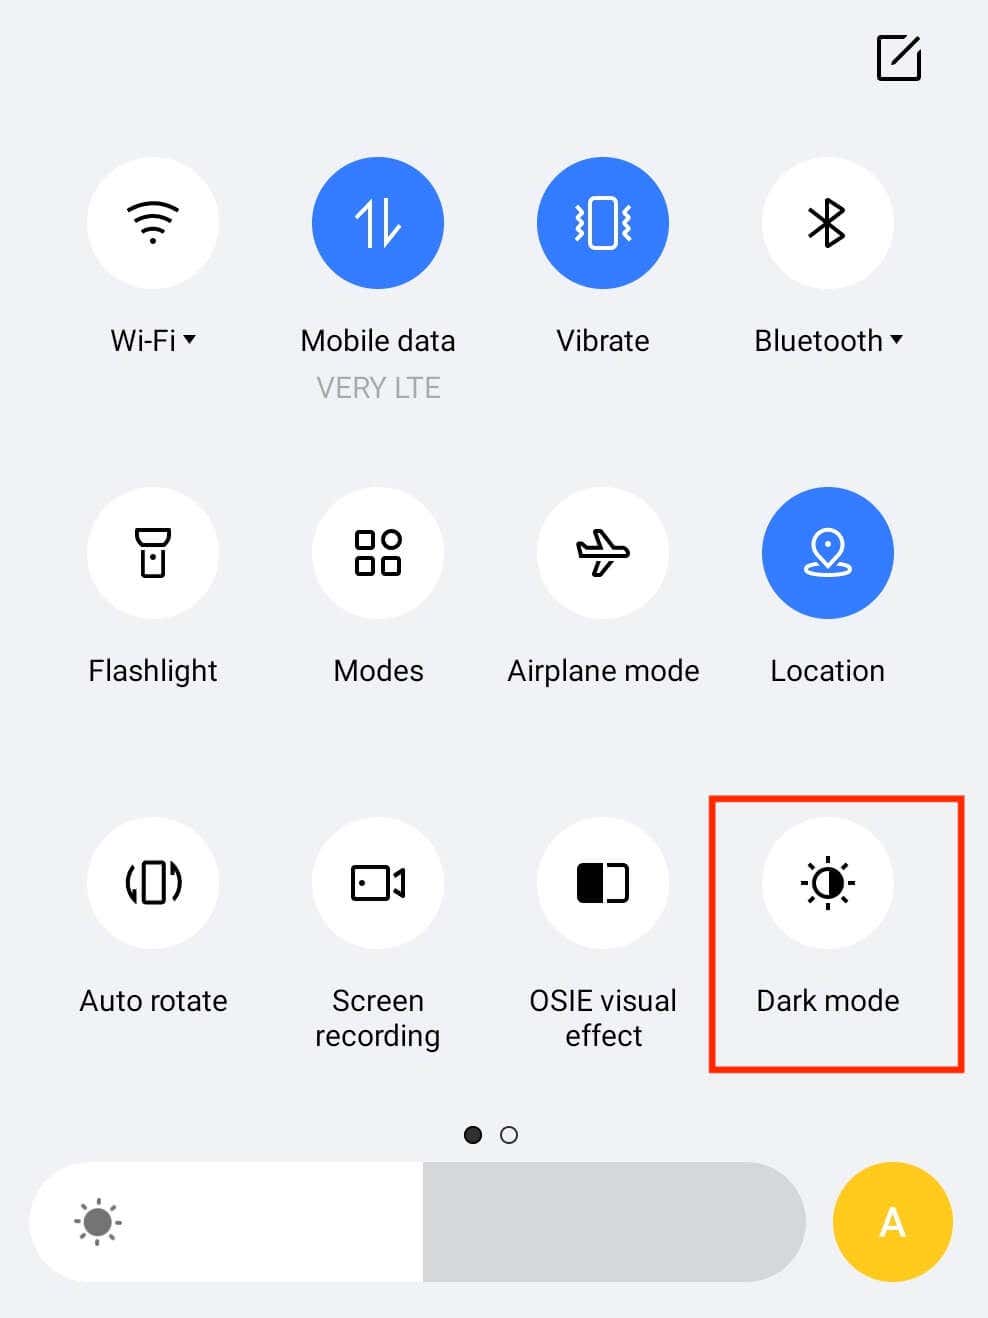 How To Enable Dark Mode On Instagram For Android